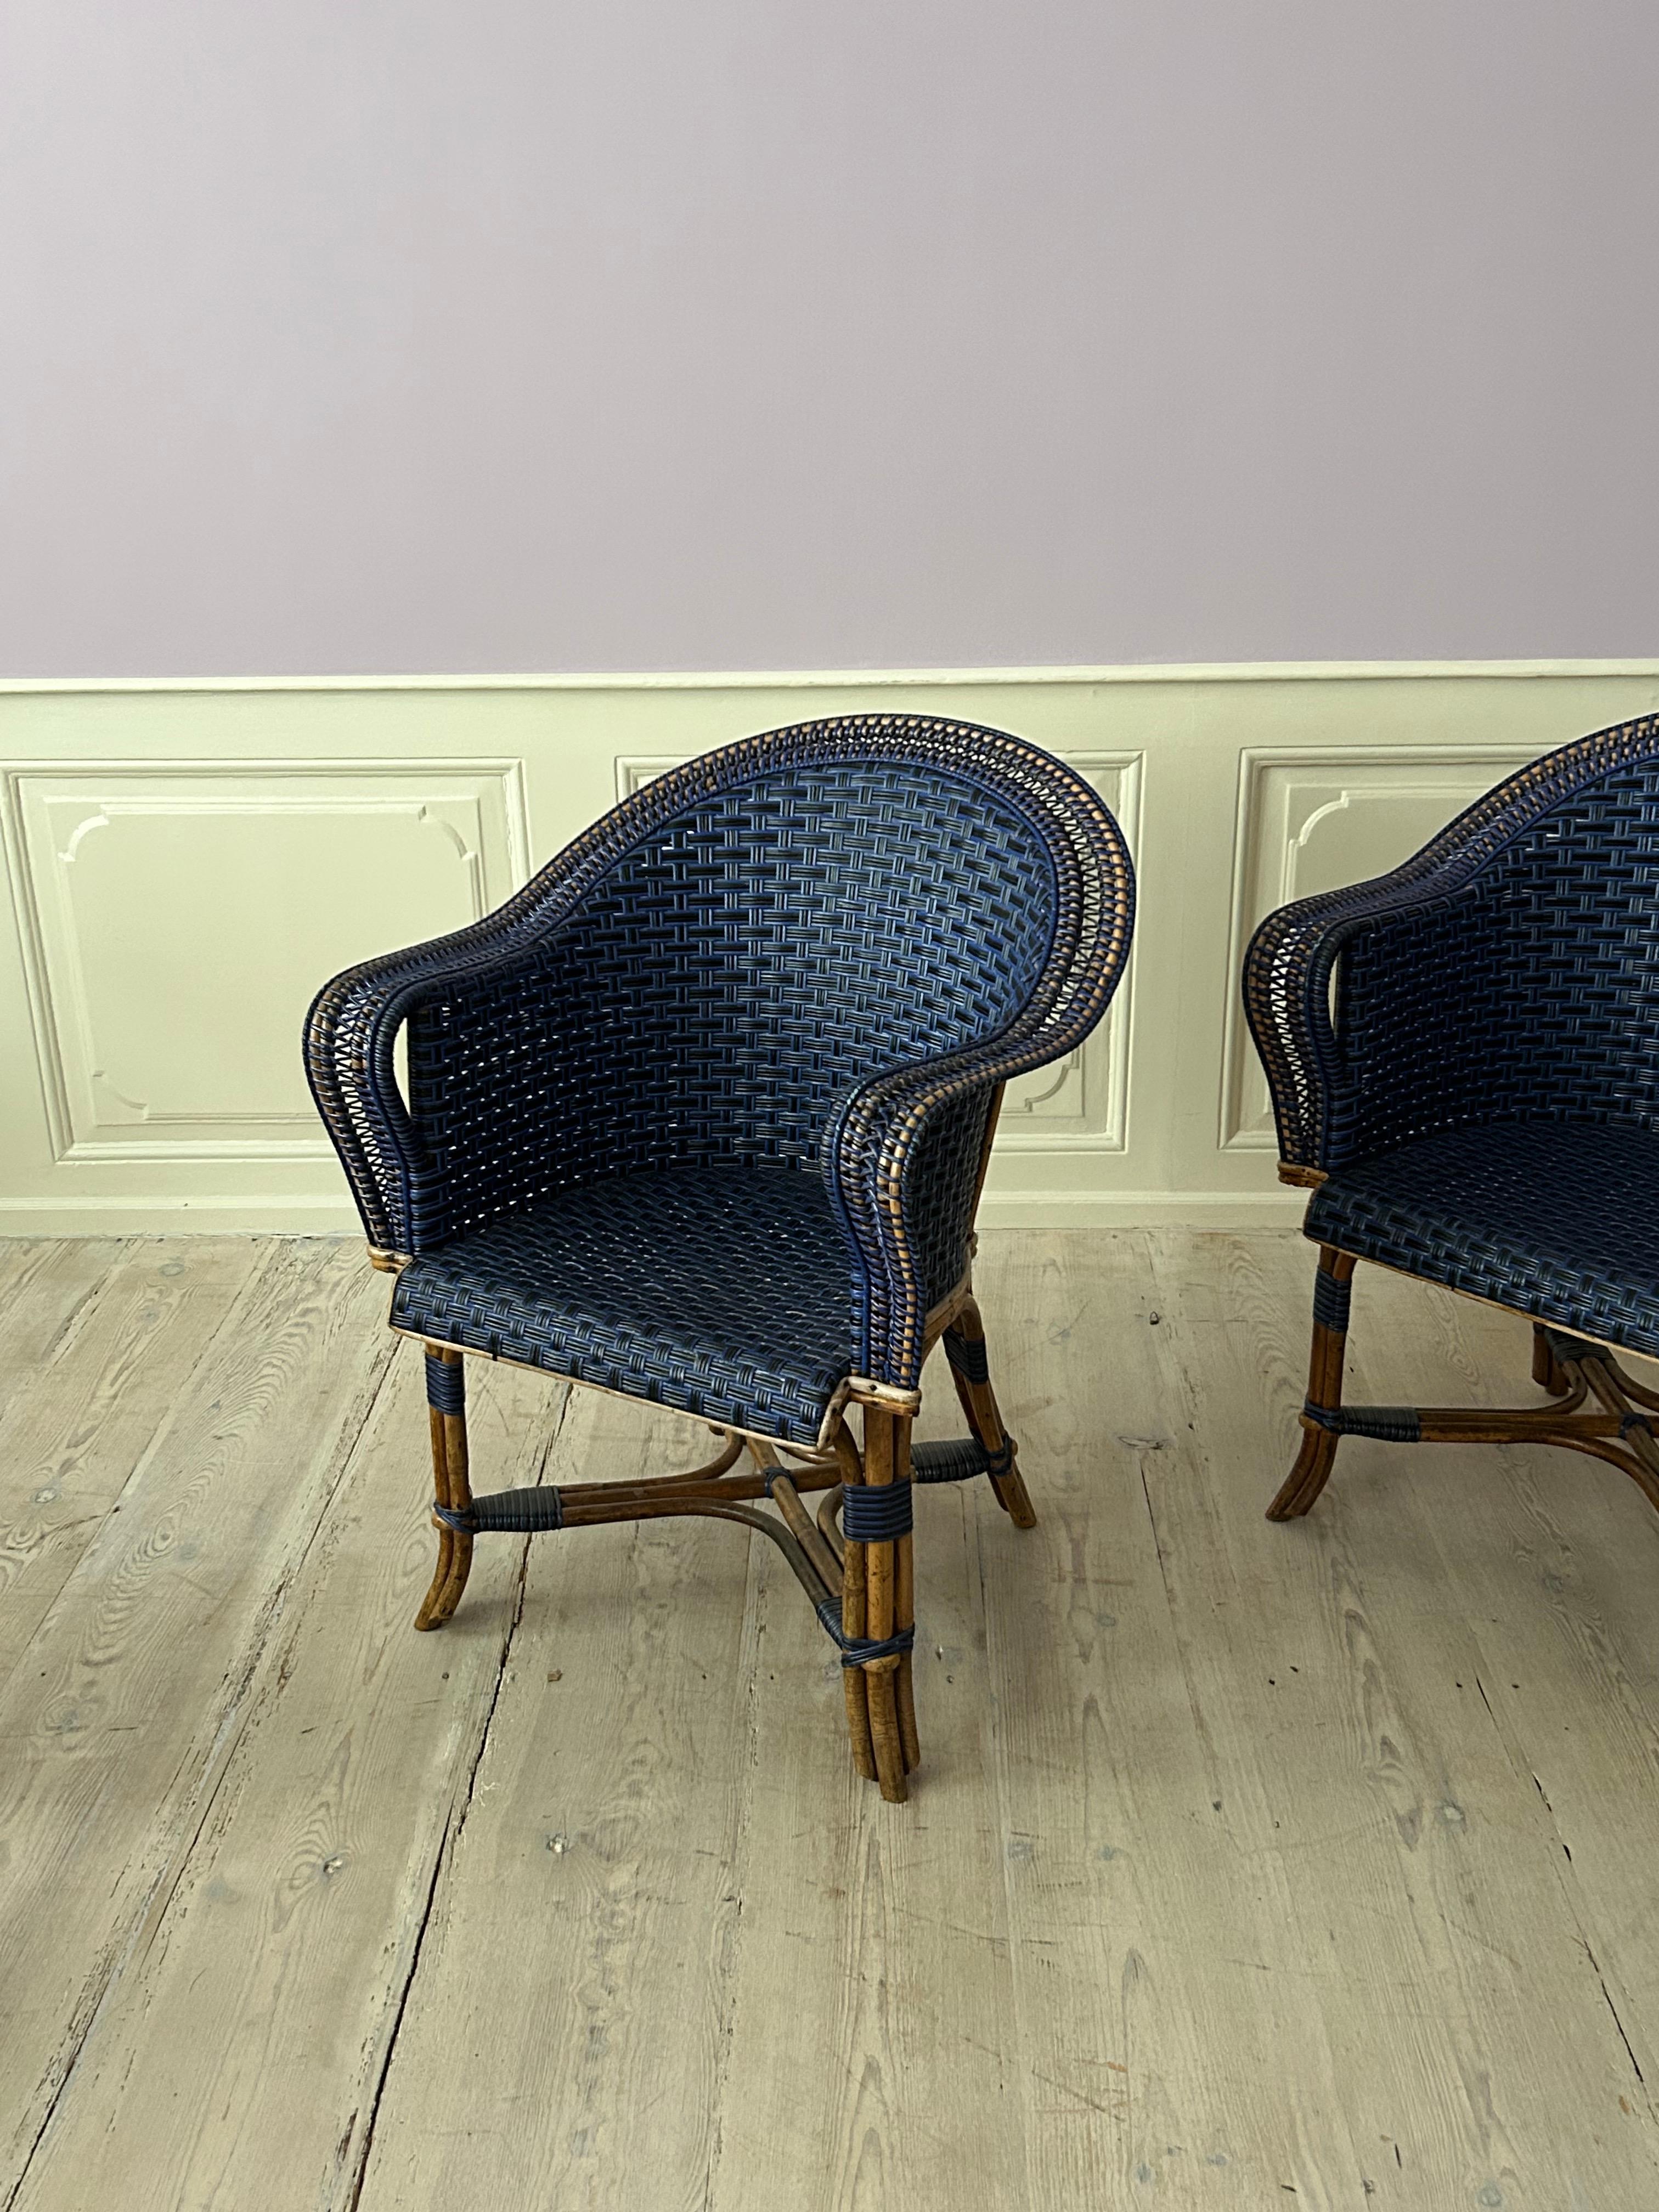 Vintage Pair of Armchairs in Blue and Black Rattan, France, Early 20th Century For Sale 2